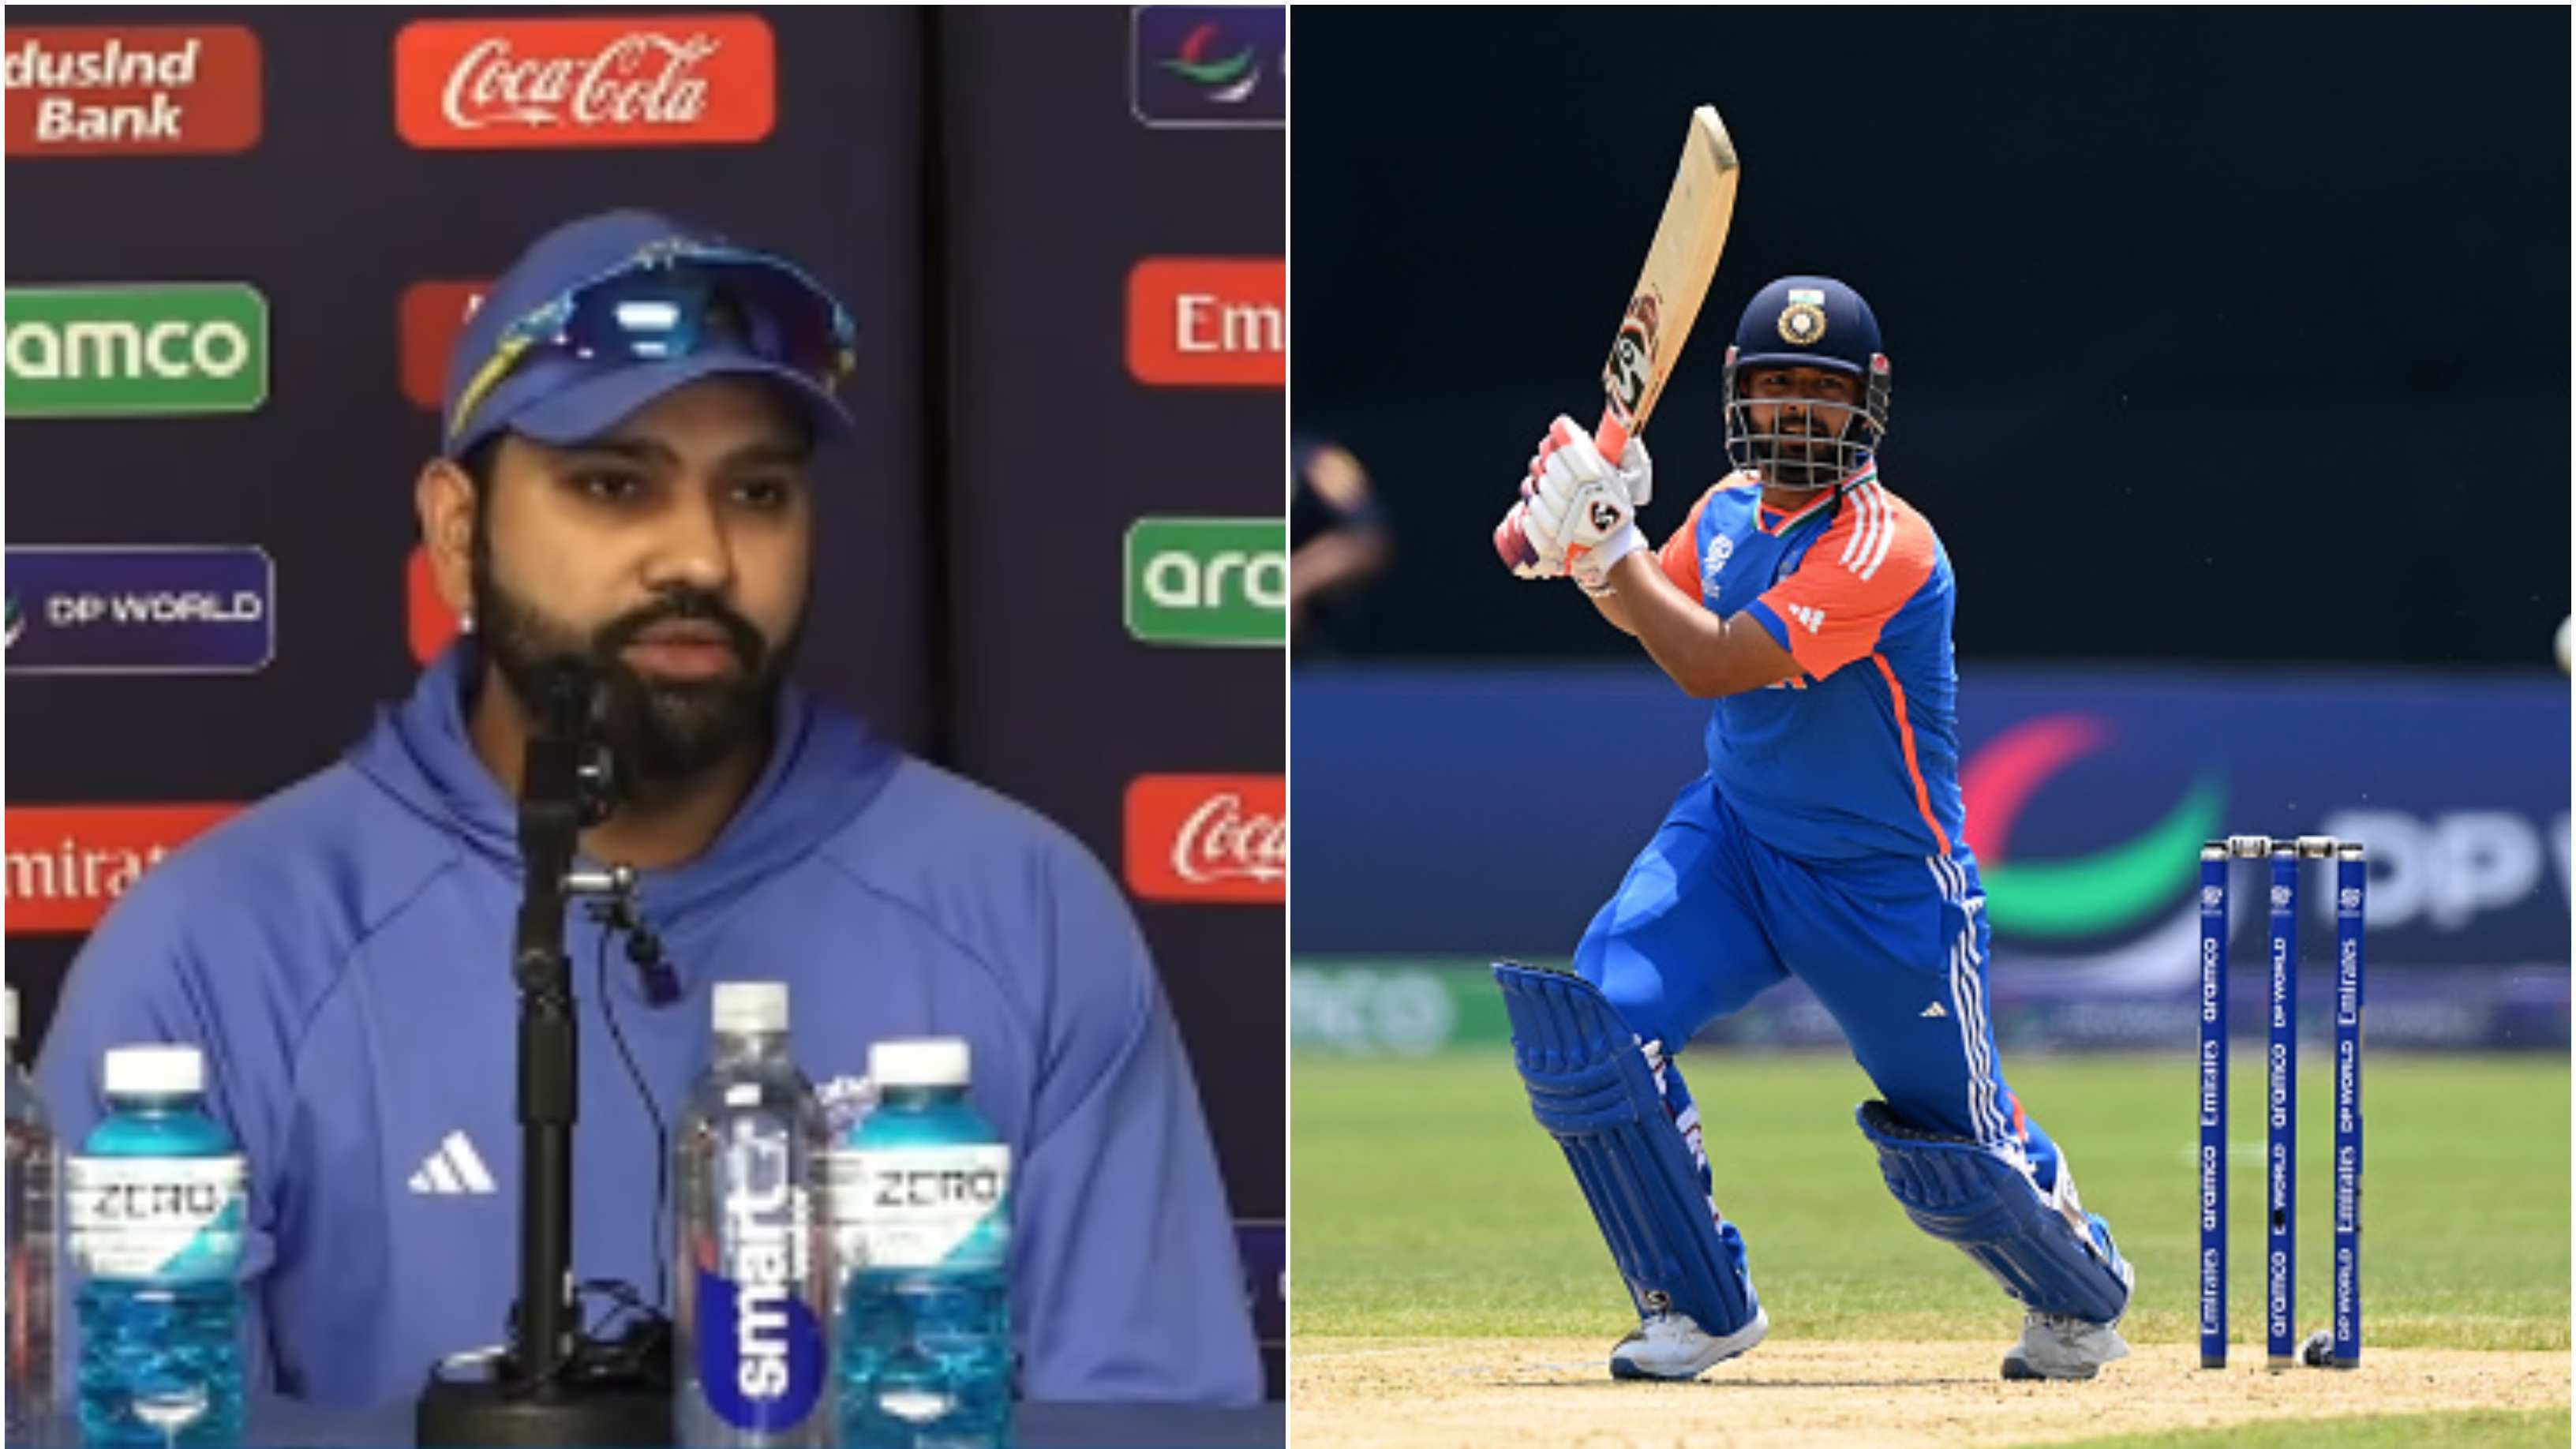 “Counterattacking ability against spin will be important”: Rohit Sharma sheds light on Rishabh Pant’s role as No. 3 batter